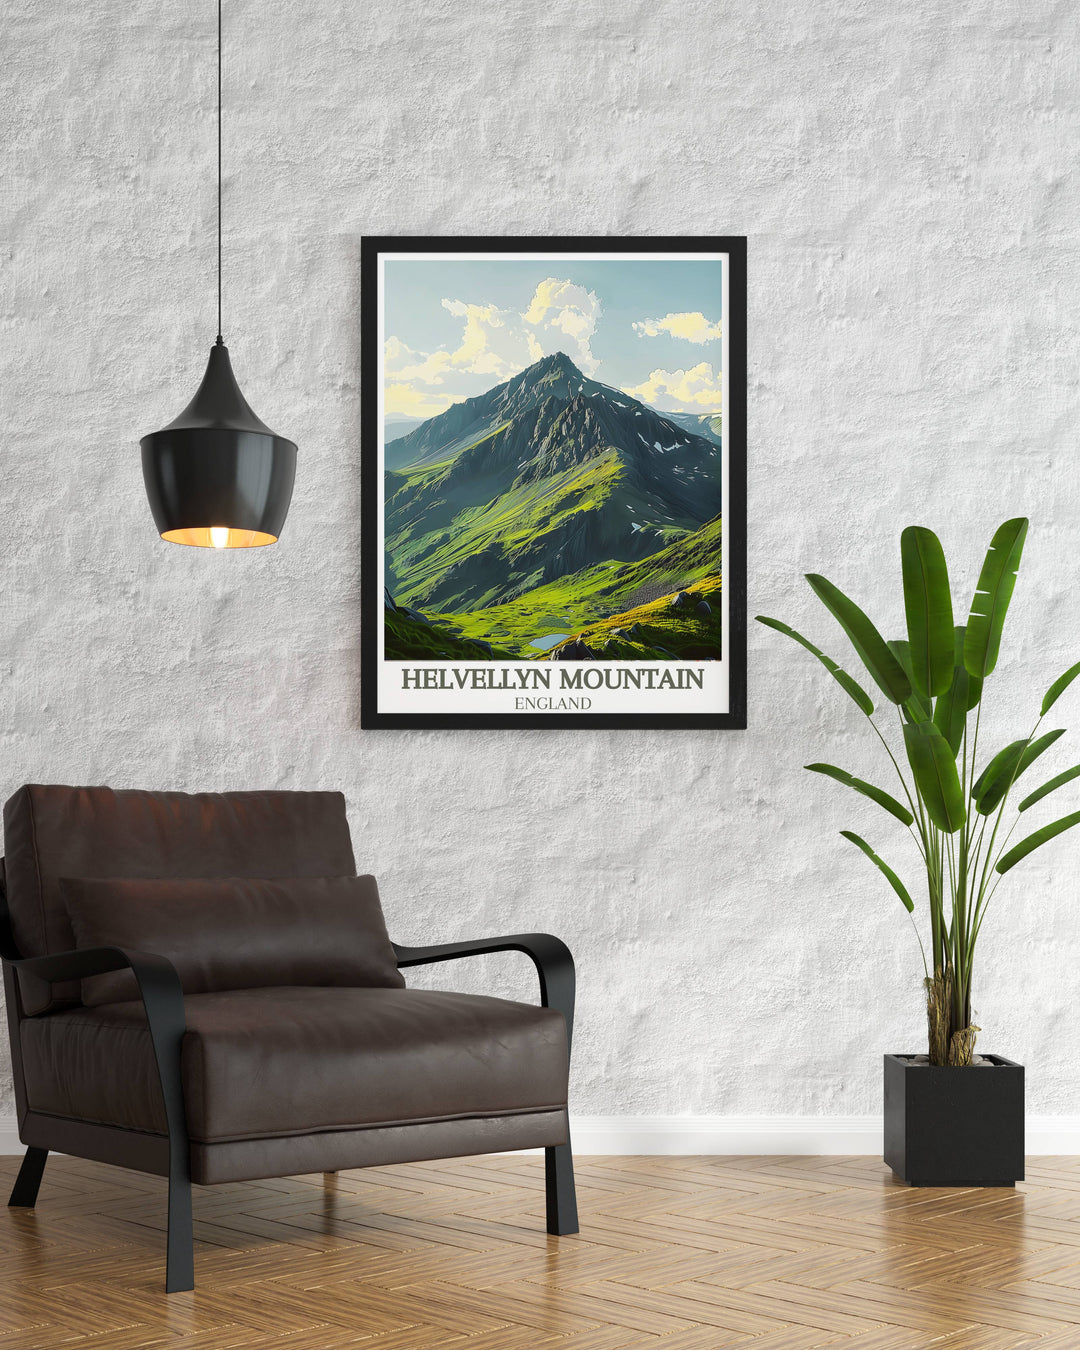 Helvellyn Mountain wall art featuring a stunning landscape of the Lake District perfect for adding a touch of nature to your home a great way to celebrate the beauty of national parks and the adventures they inspire an ideal gift for nature lovers